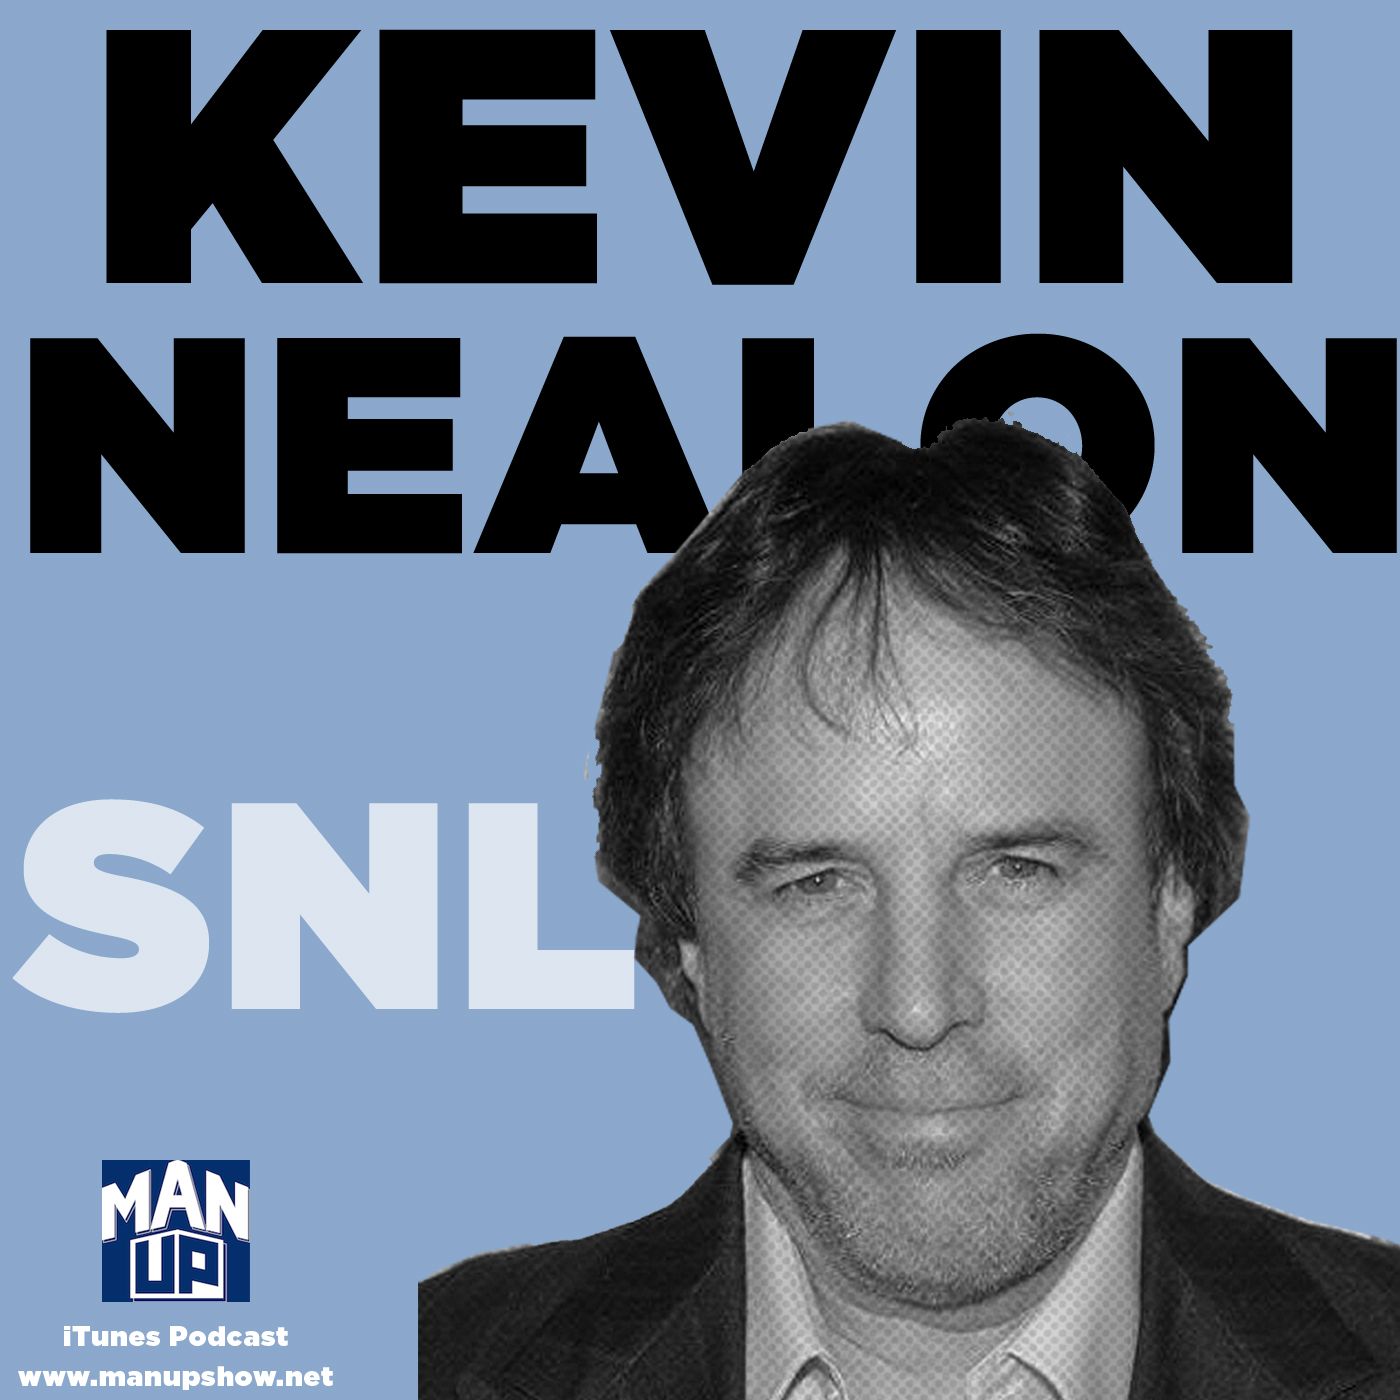 Kevin Nealon: the "SNL" superstar on his amazing career and funny Dad stories